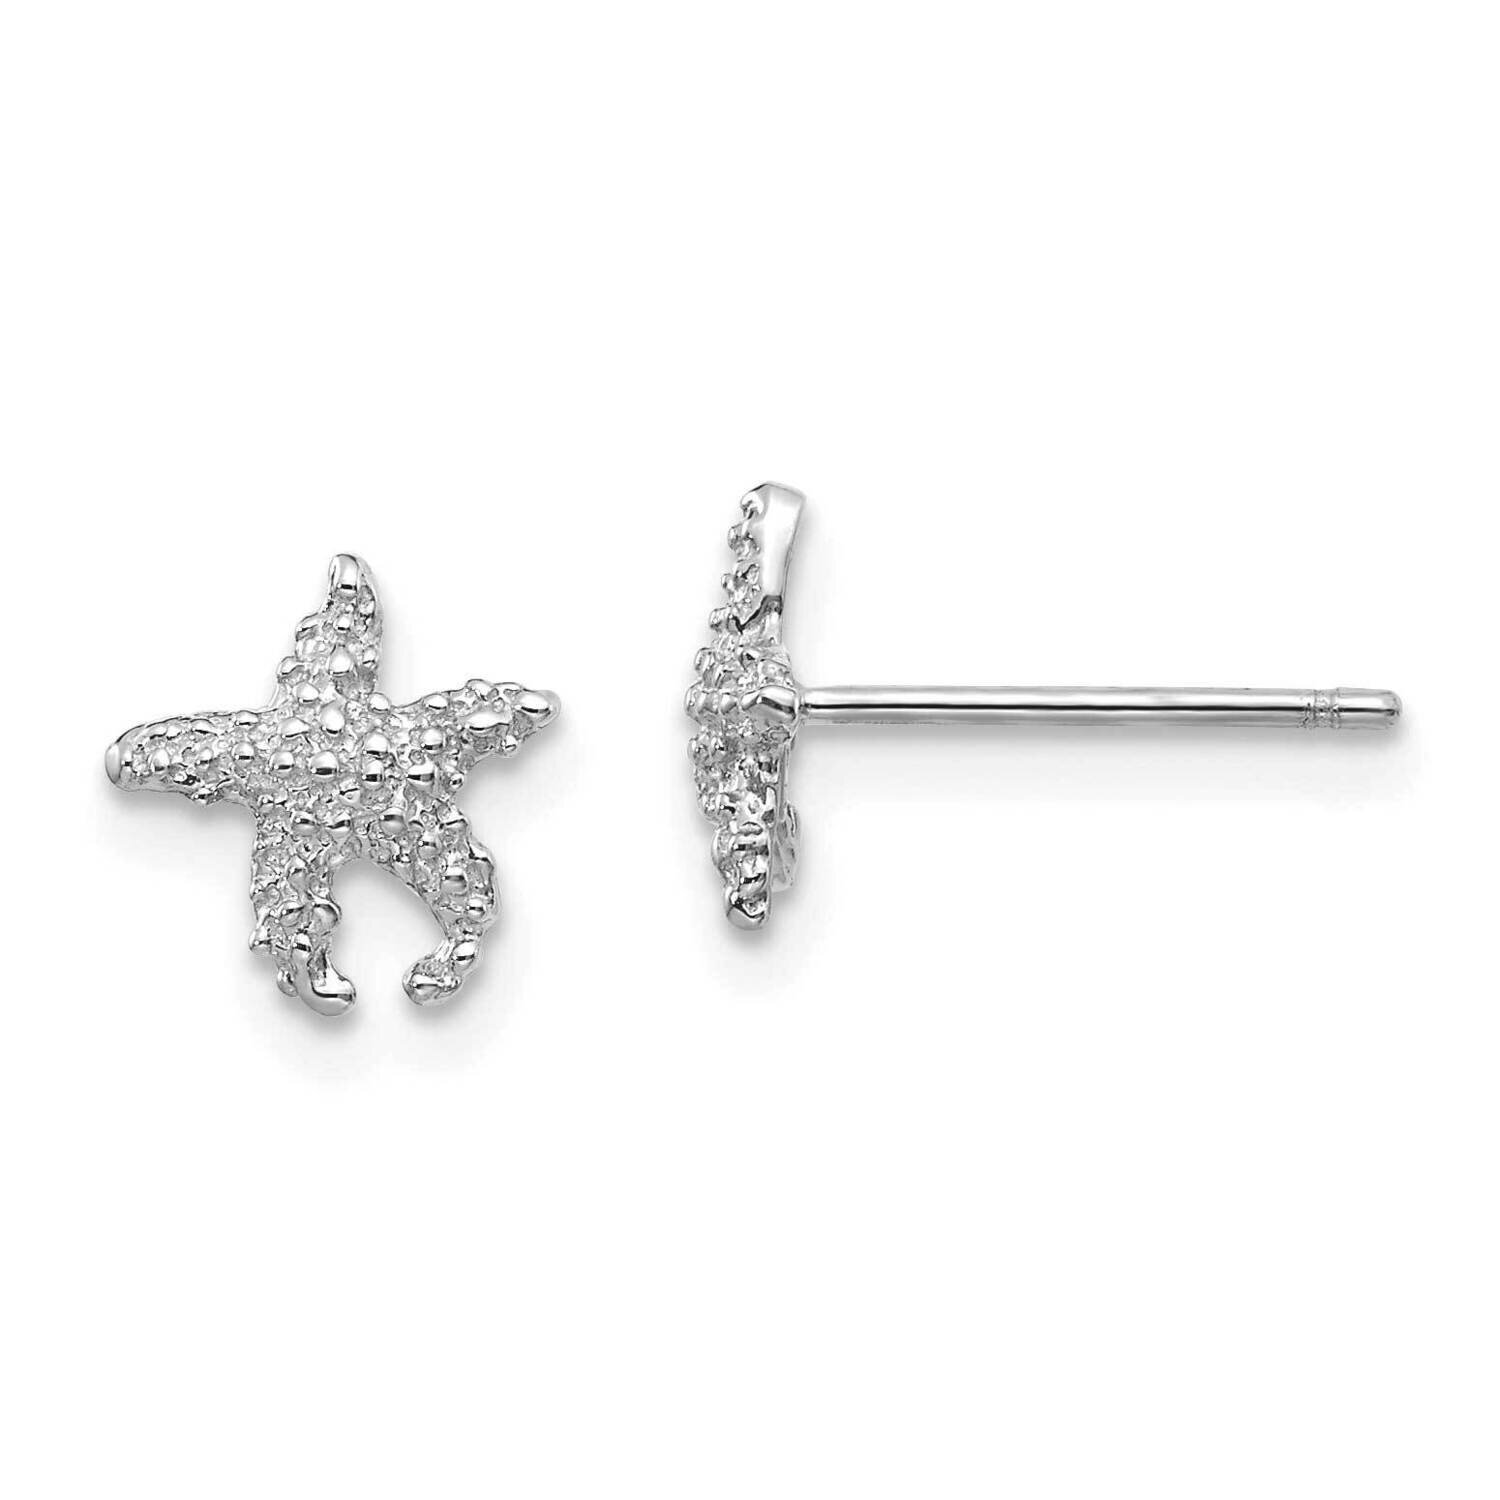 Textured Starfish Post Earrings 14k White Gold Polished TM765W